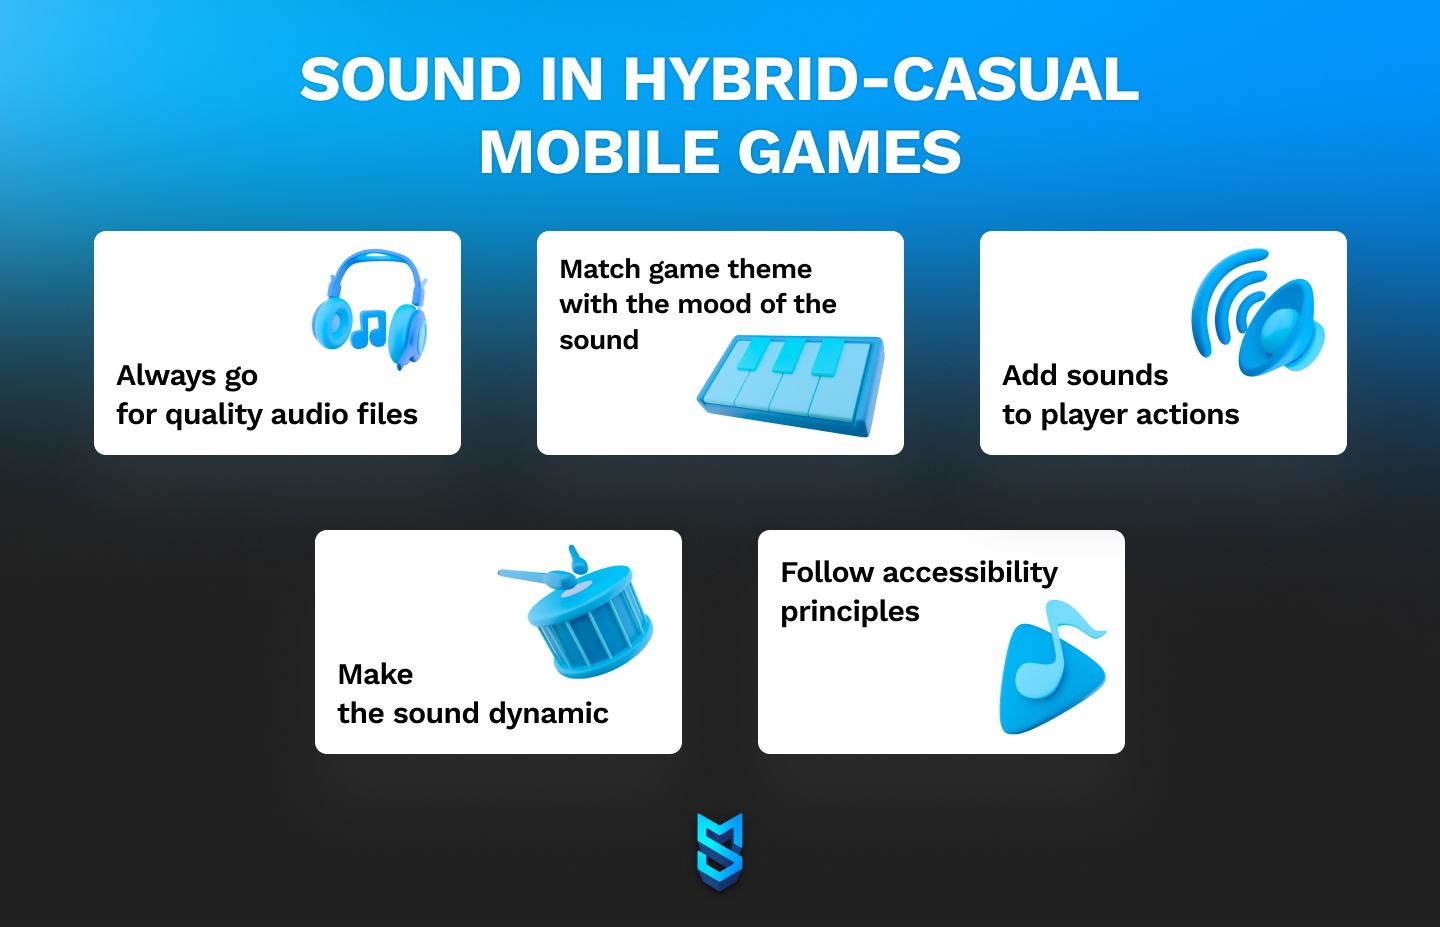 Sound in hybrid-casual mobile games